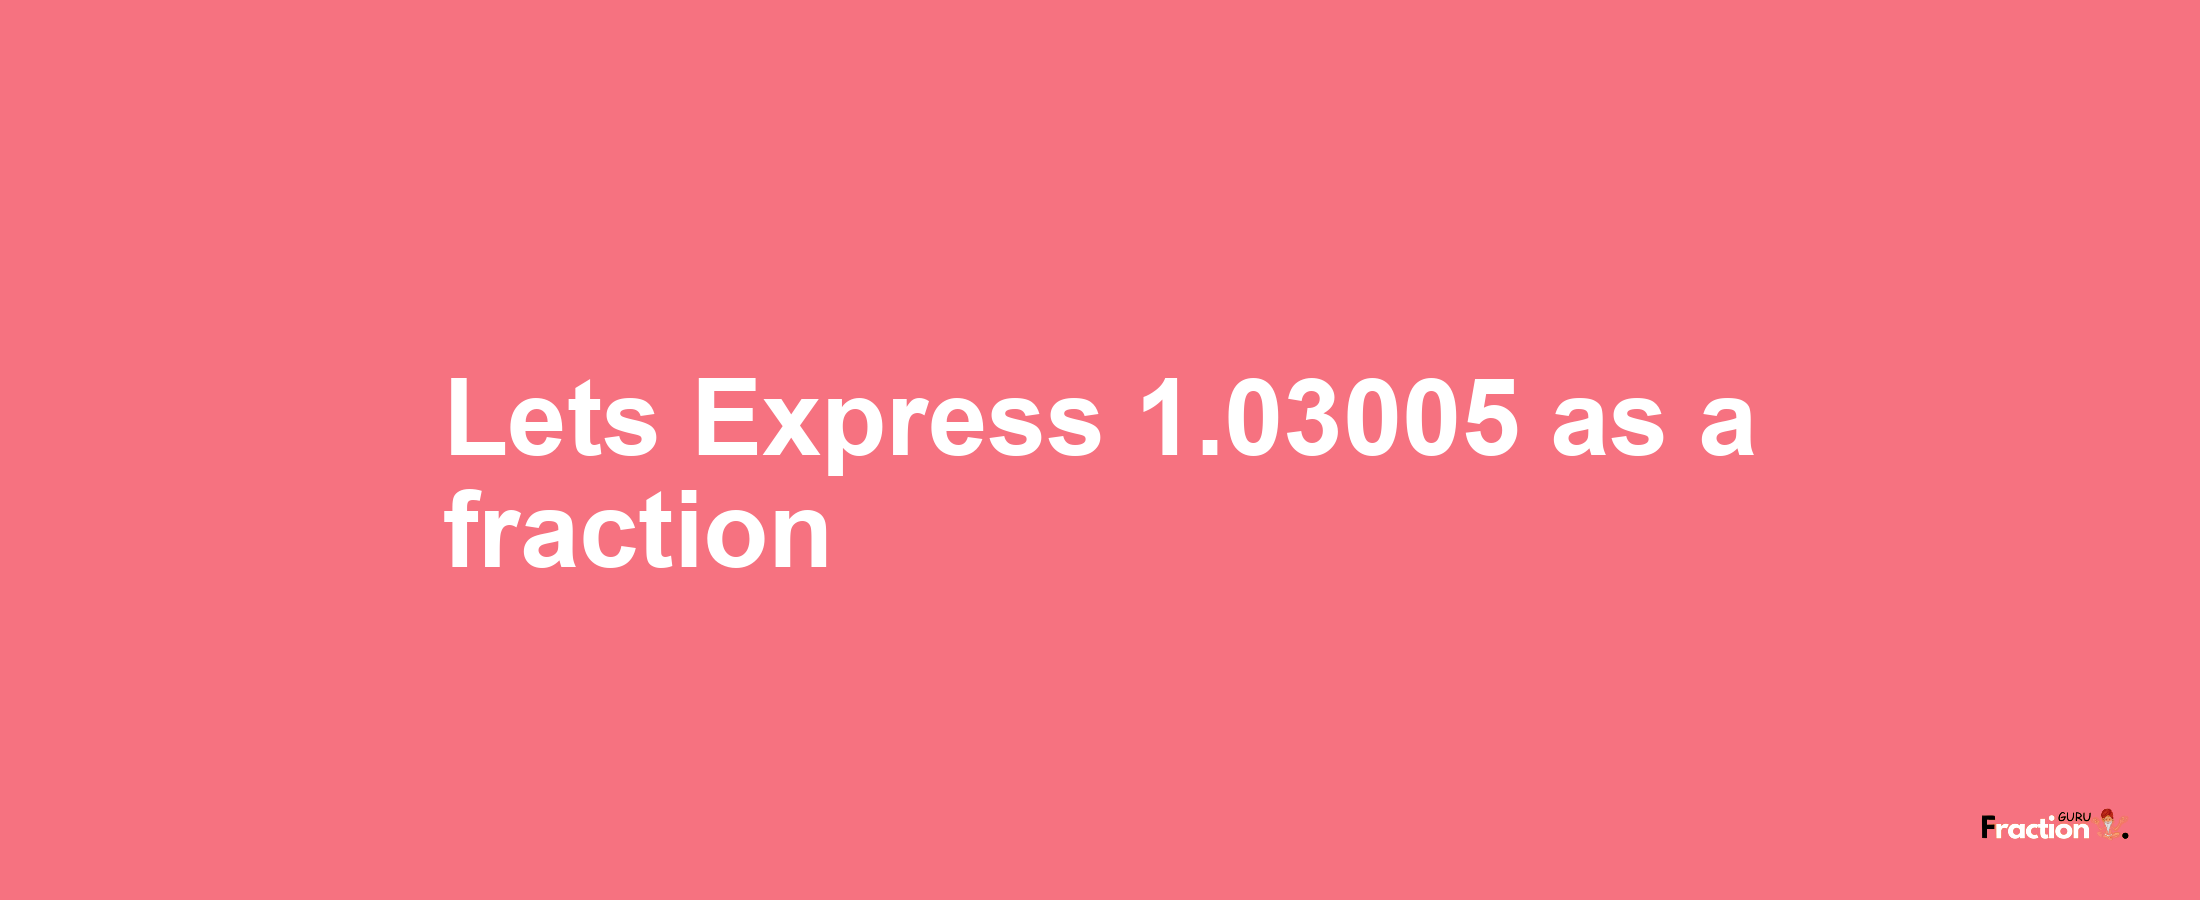 Lets Express 1.03005 as afraction